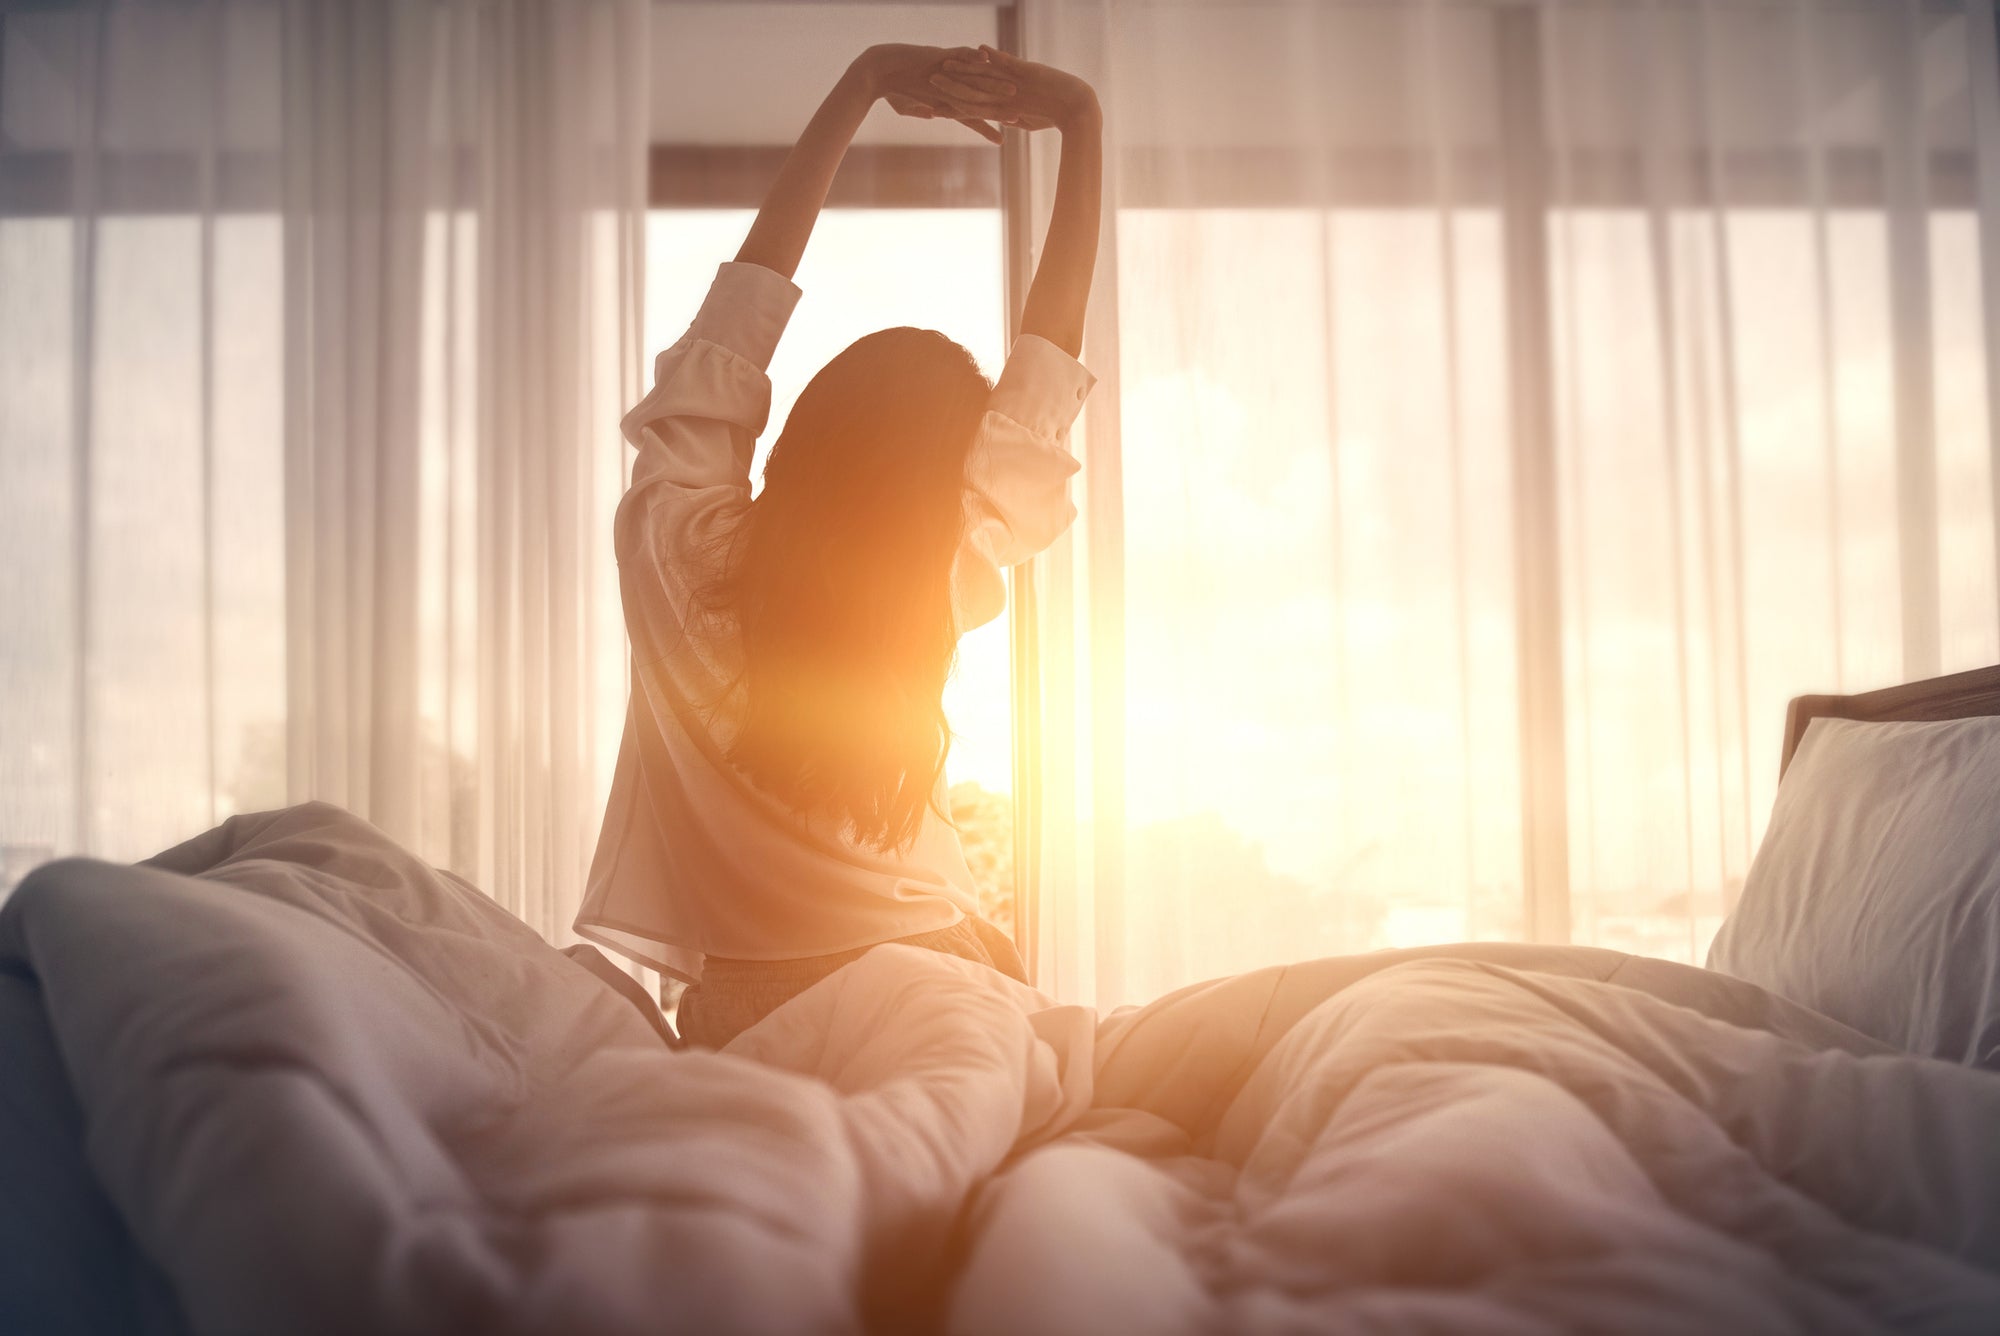 An image of a woman sitting and stretching on her bed against a bright sunrise.